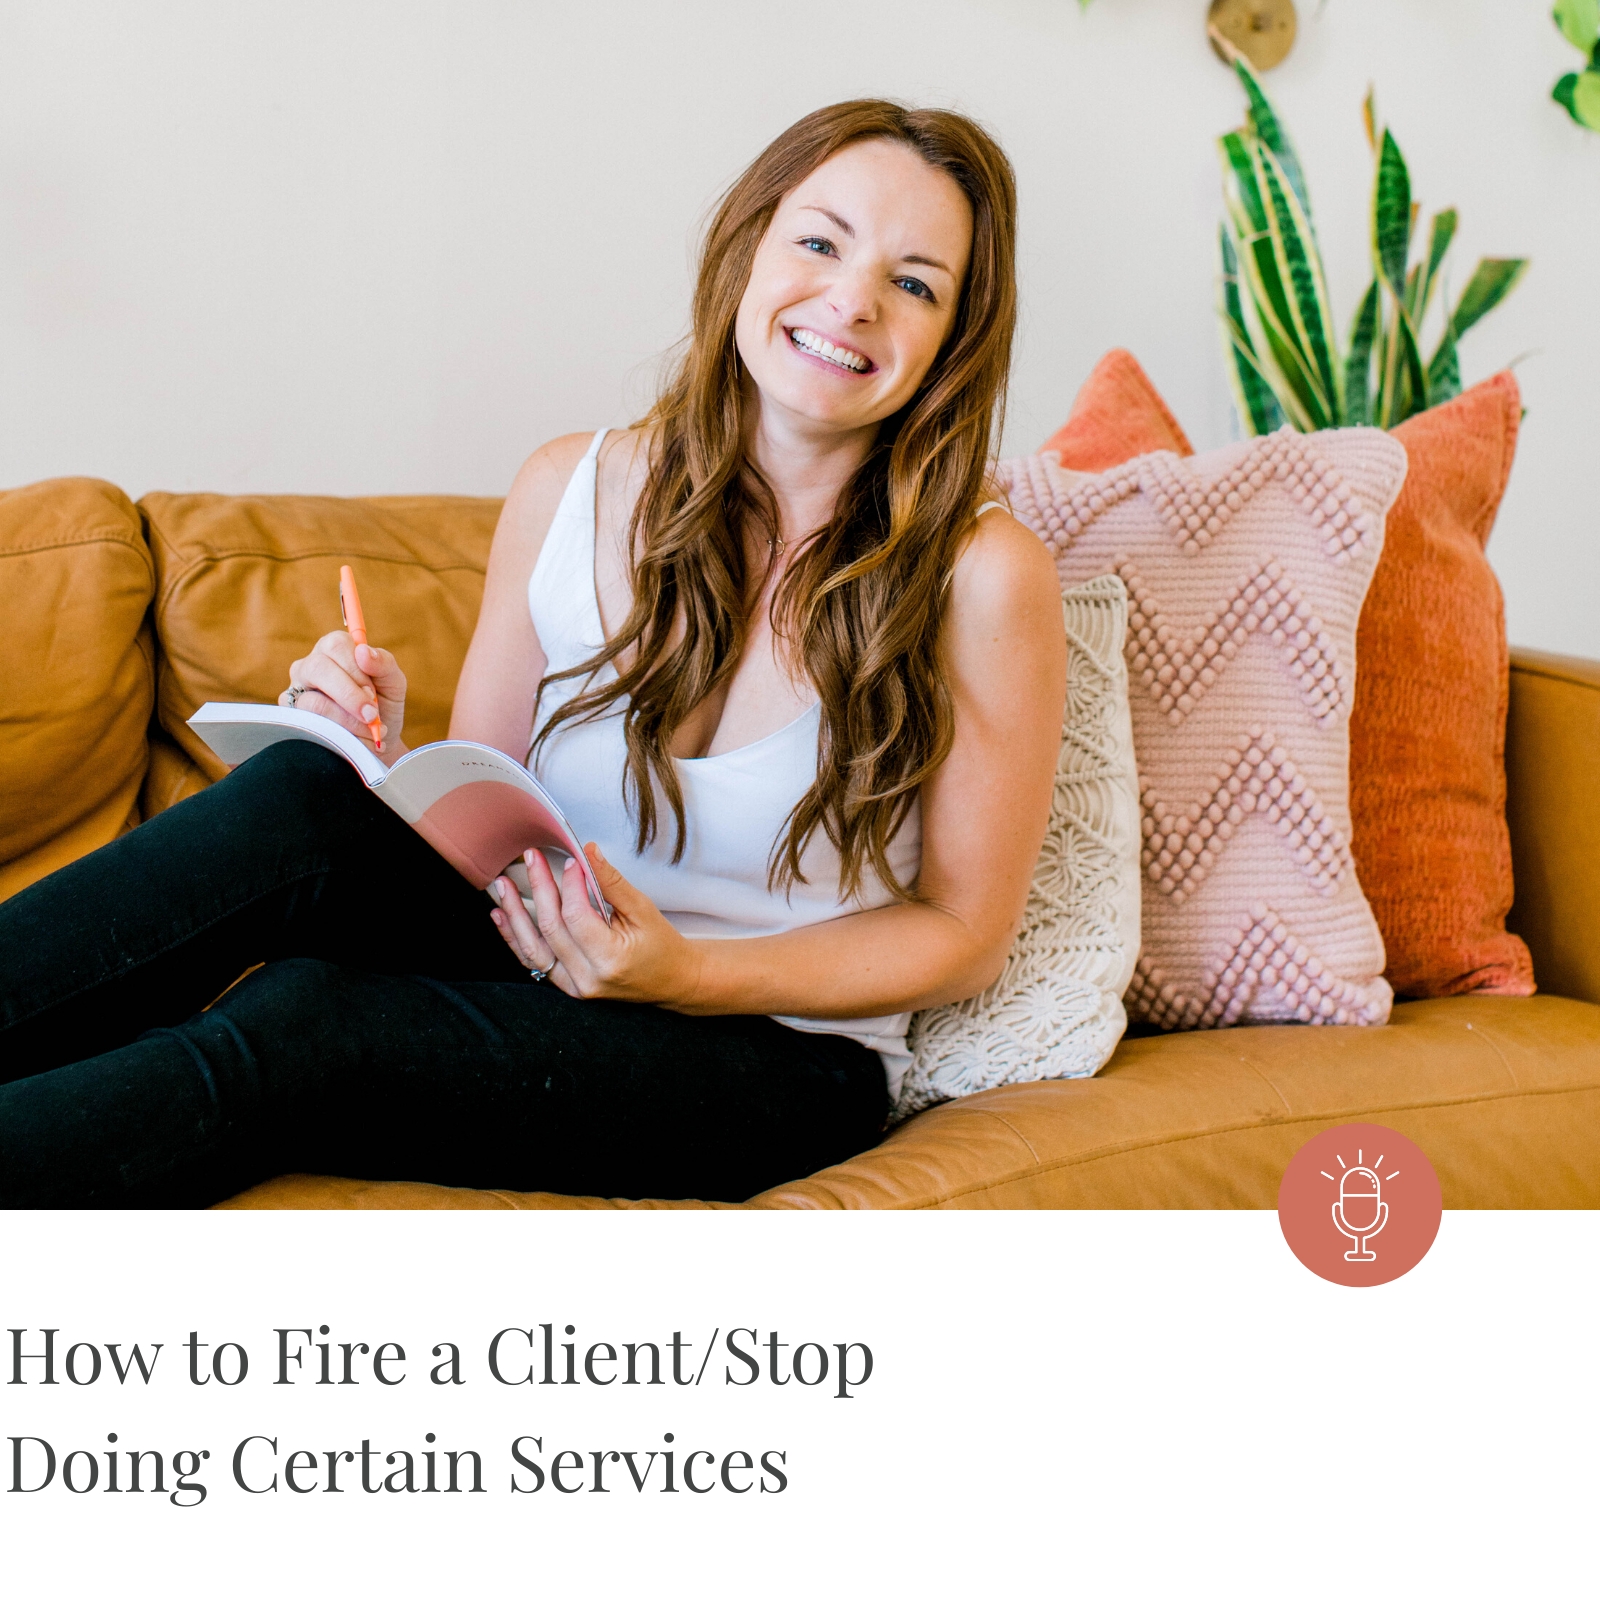 Episode #160- How to Fire a Client/Stop Doing Certain Services